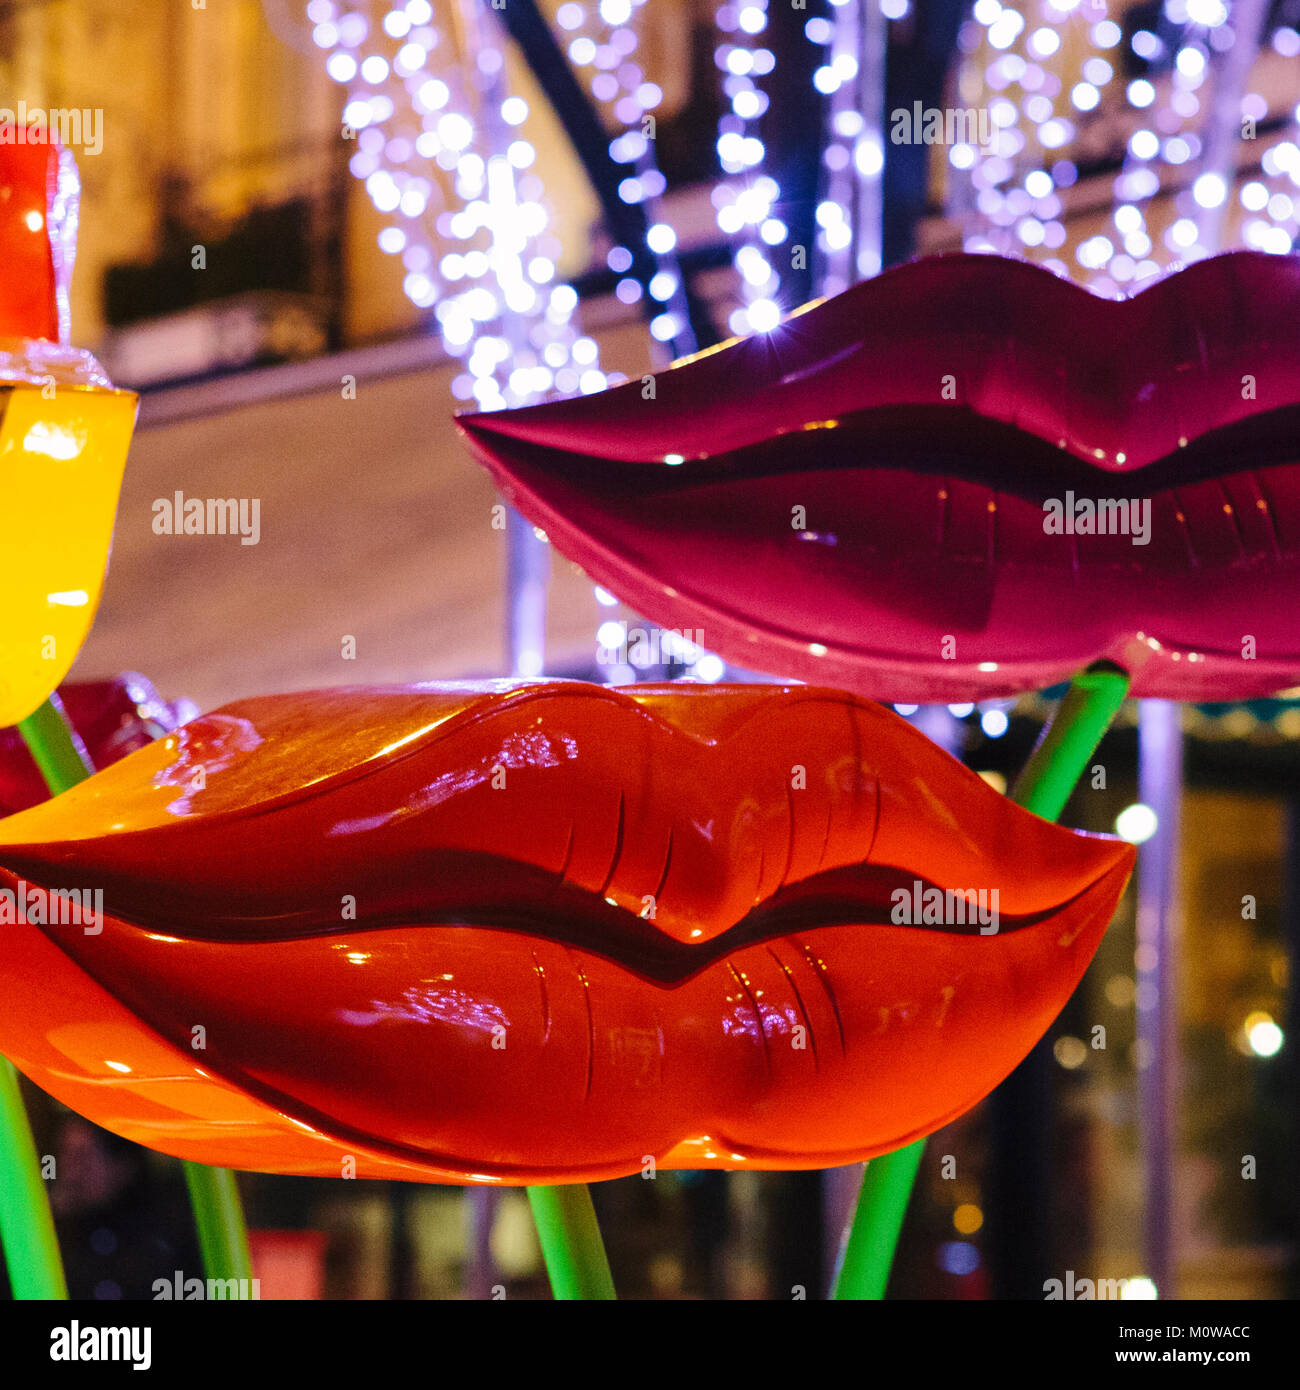 Lips fountain at night - Stravinsky fountain in Paris with beautiful colourful lips, December 2011. Close up, extreme close up, colourful. Stock Photo